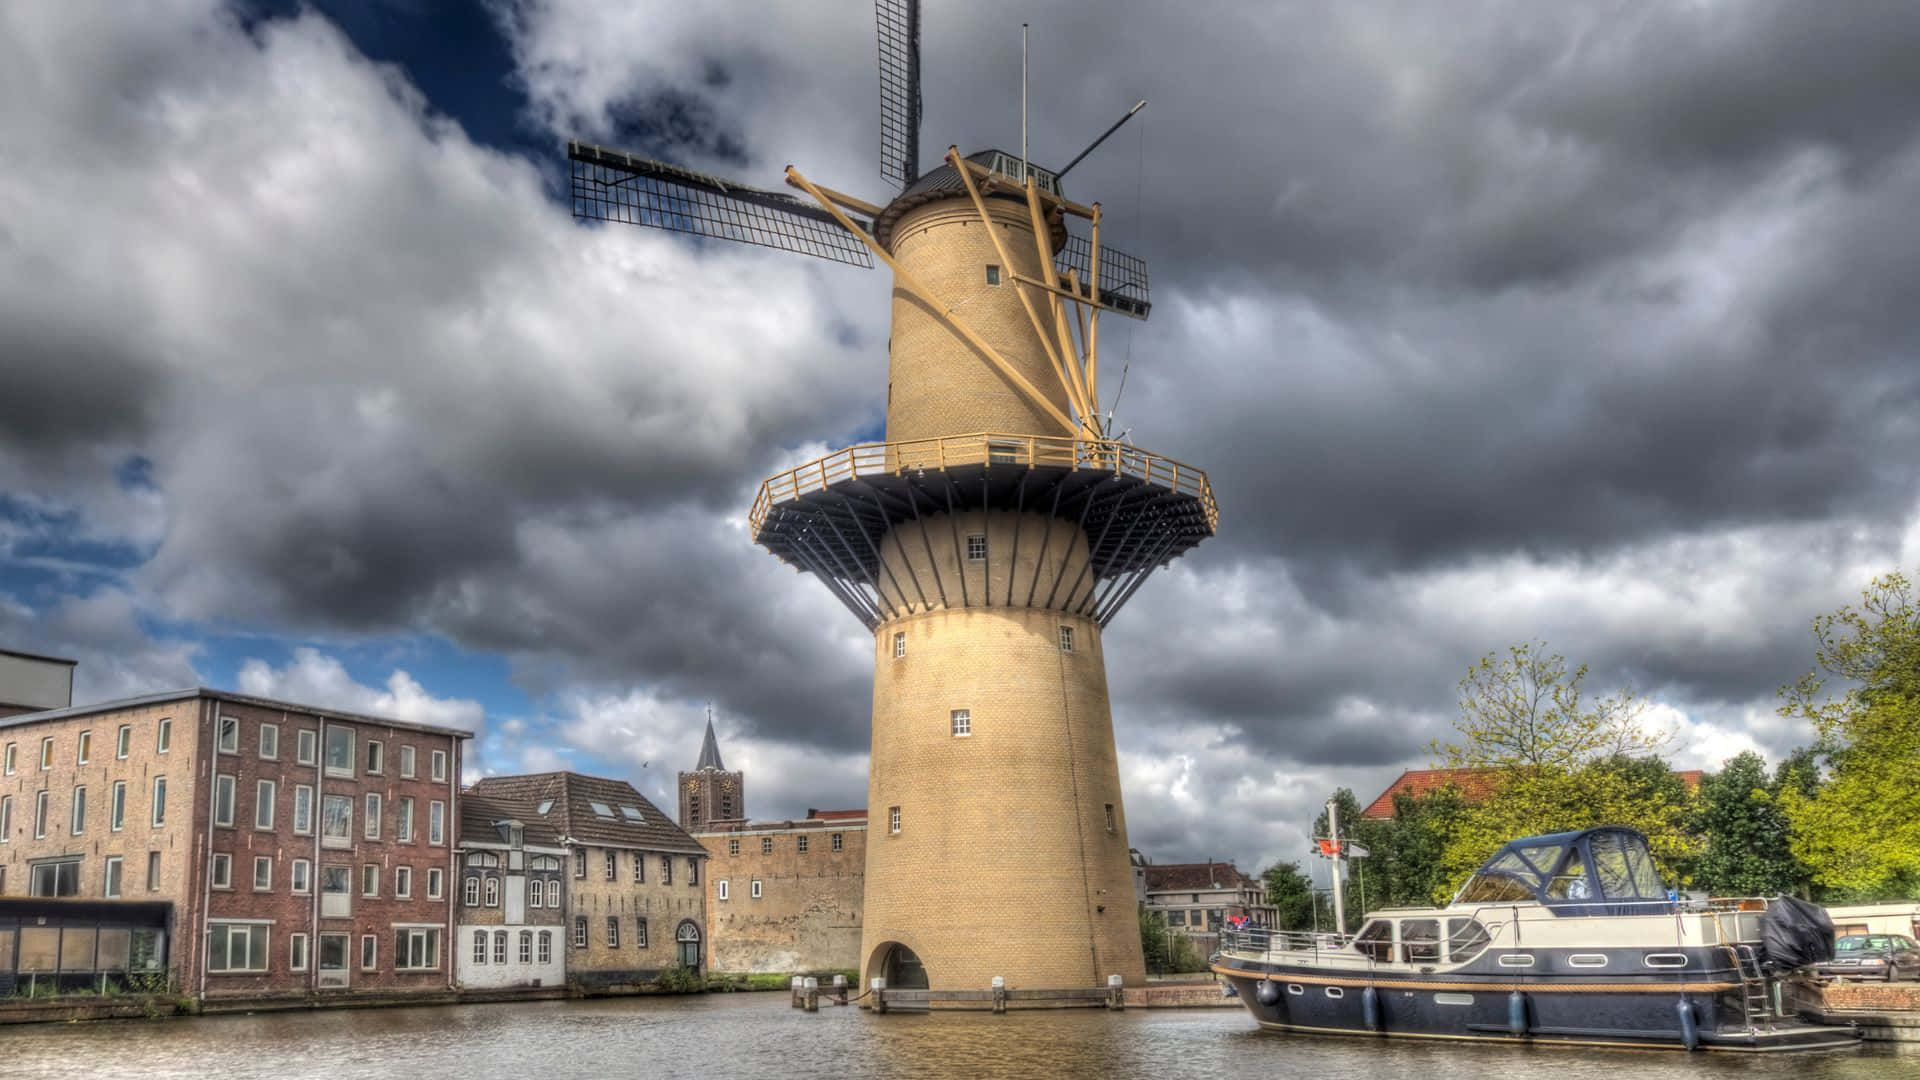 Schiedam Windmill By The Canal Wallpaper